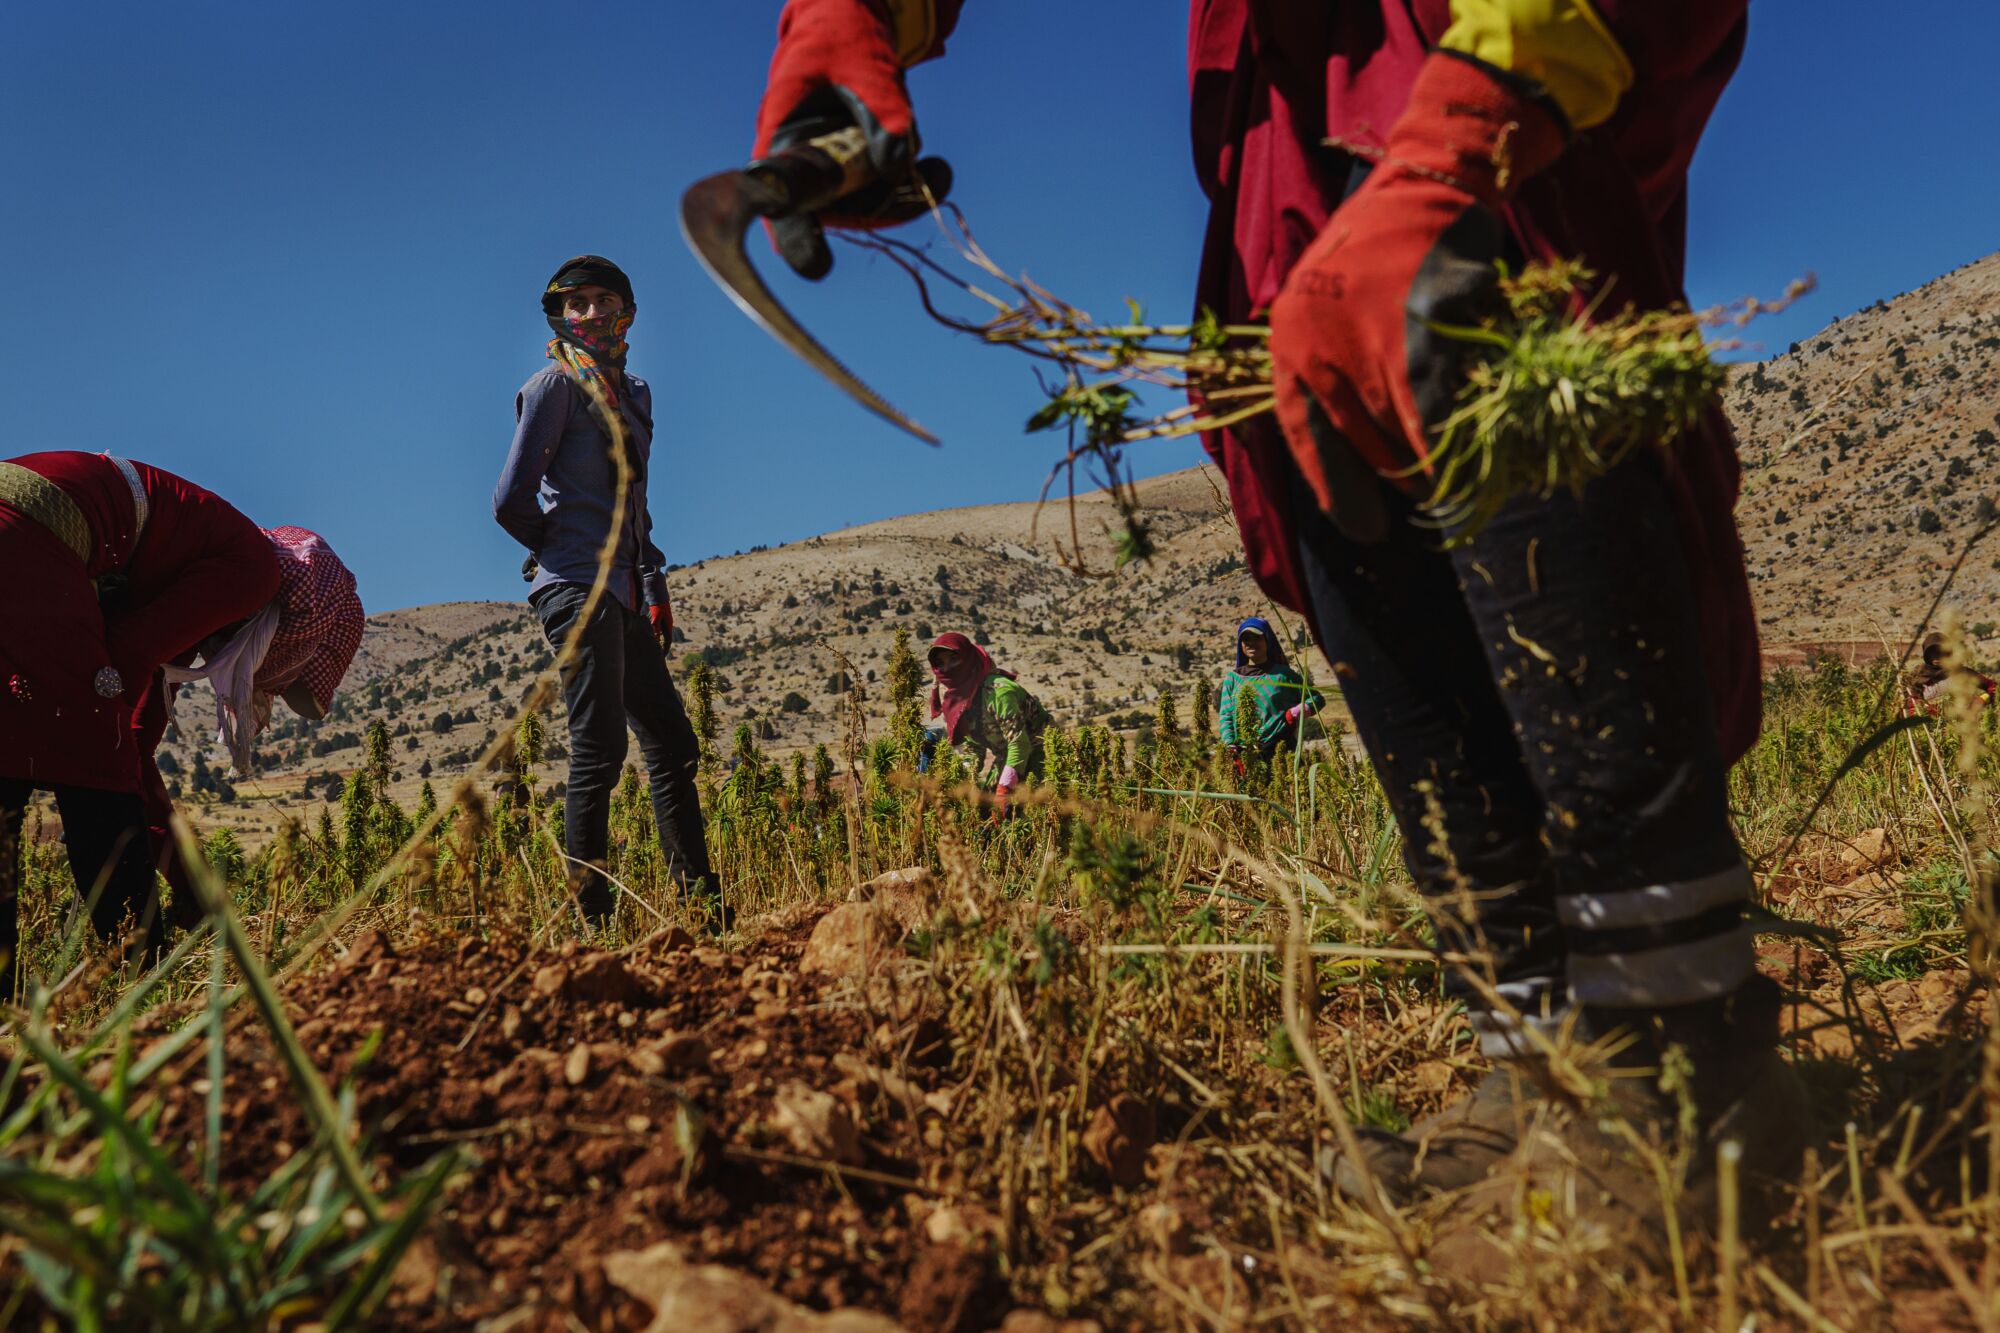 Farmworkers harvest cannabis plants at a plantation in Yammouneh, Lebanon.